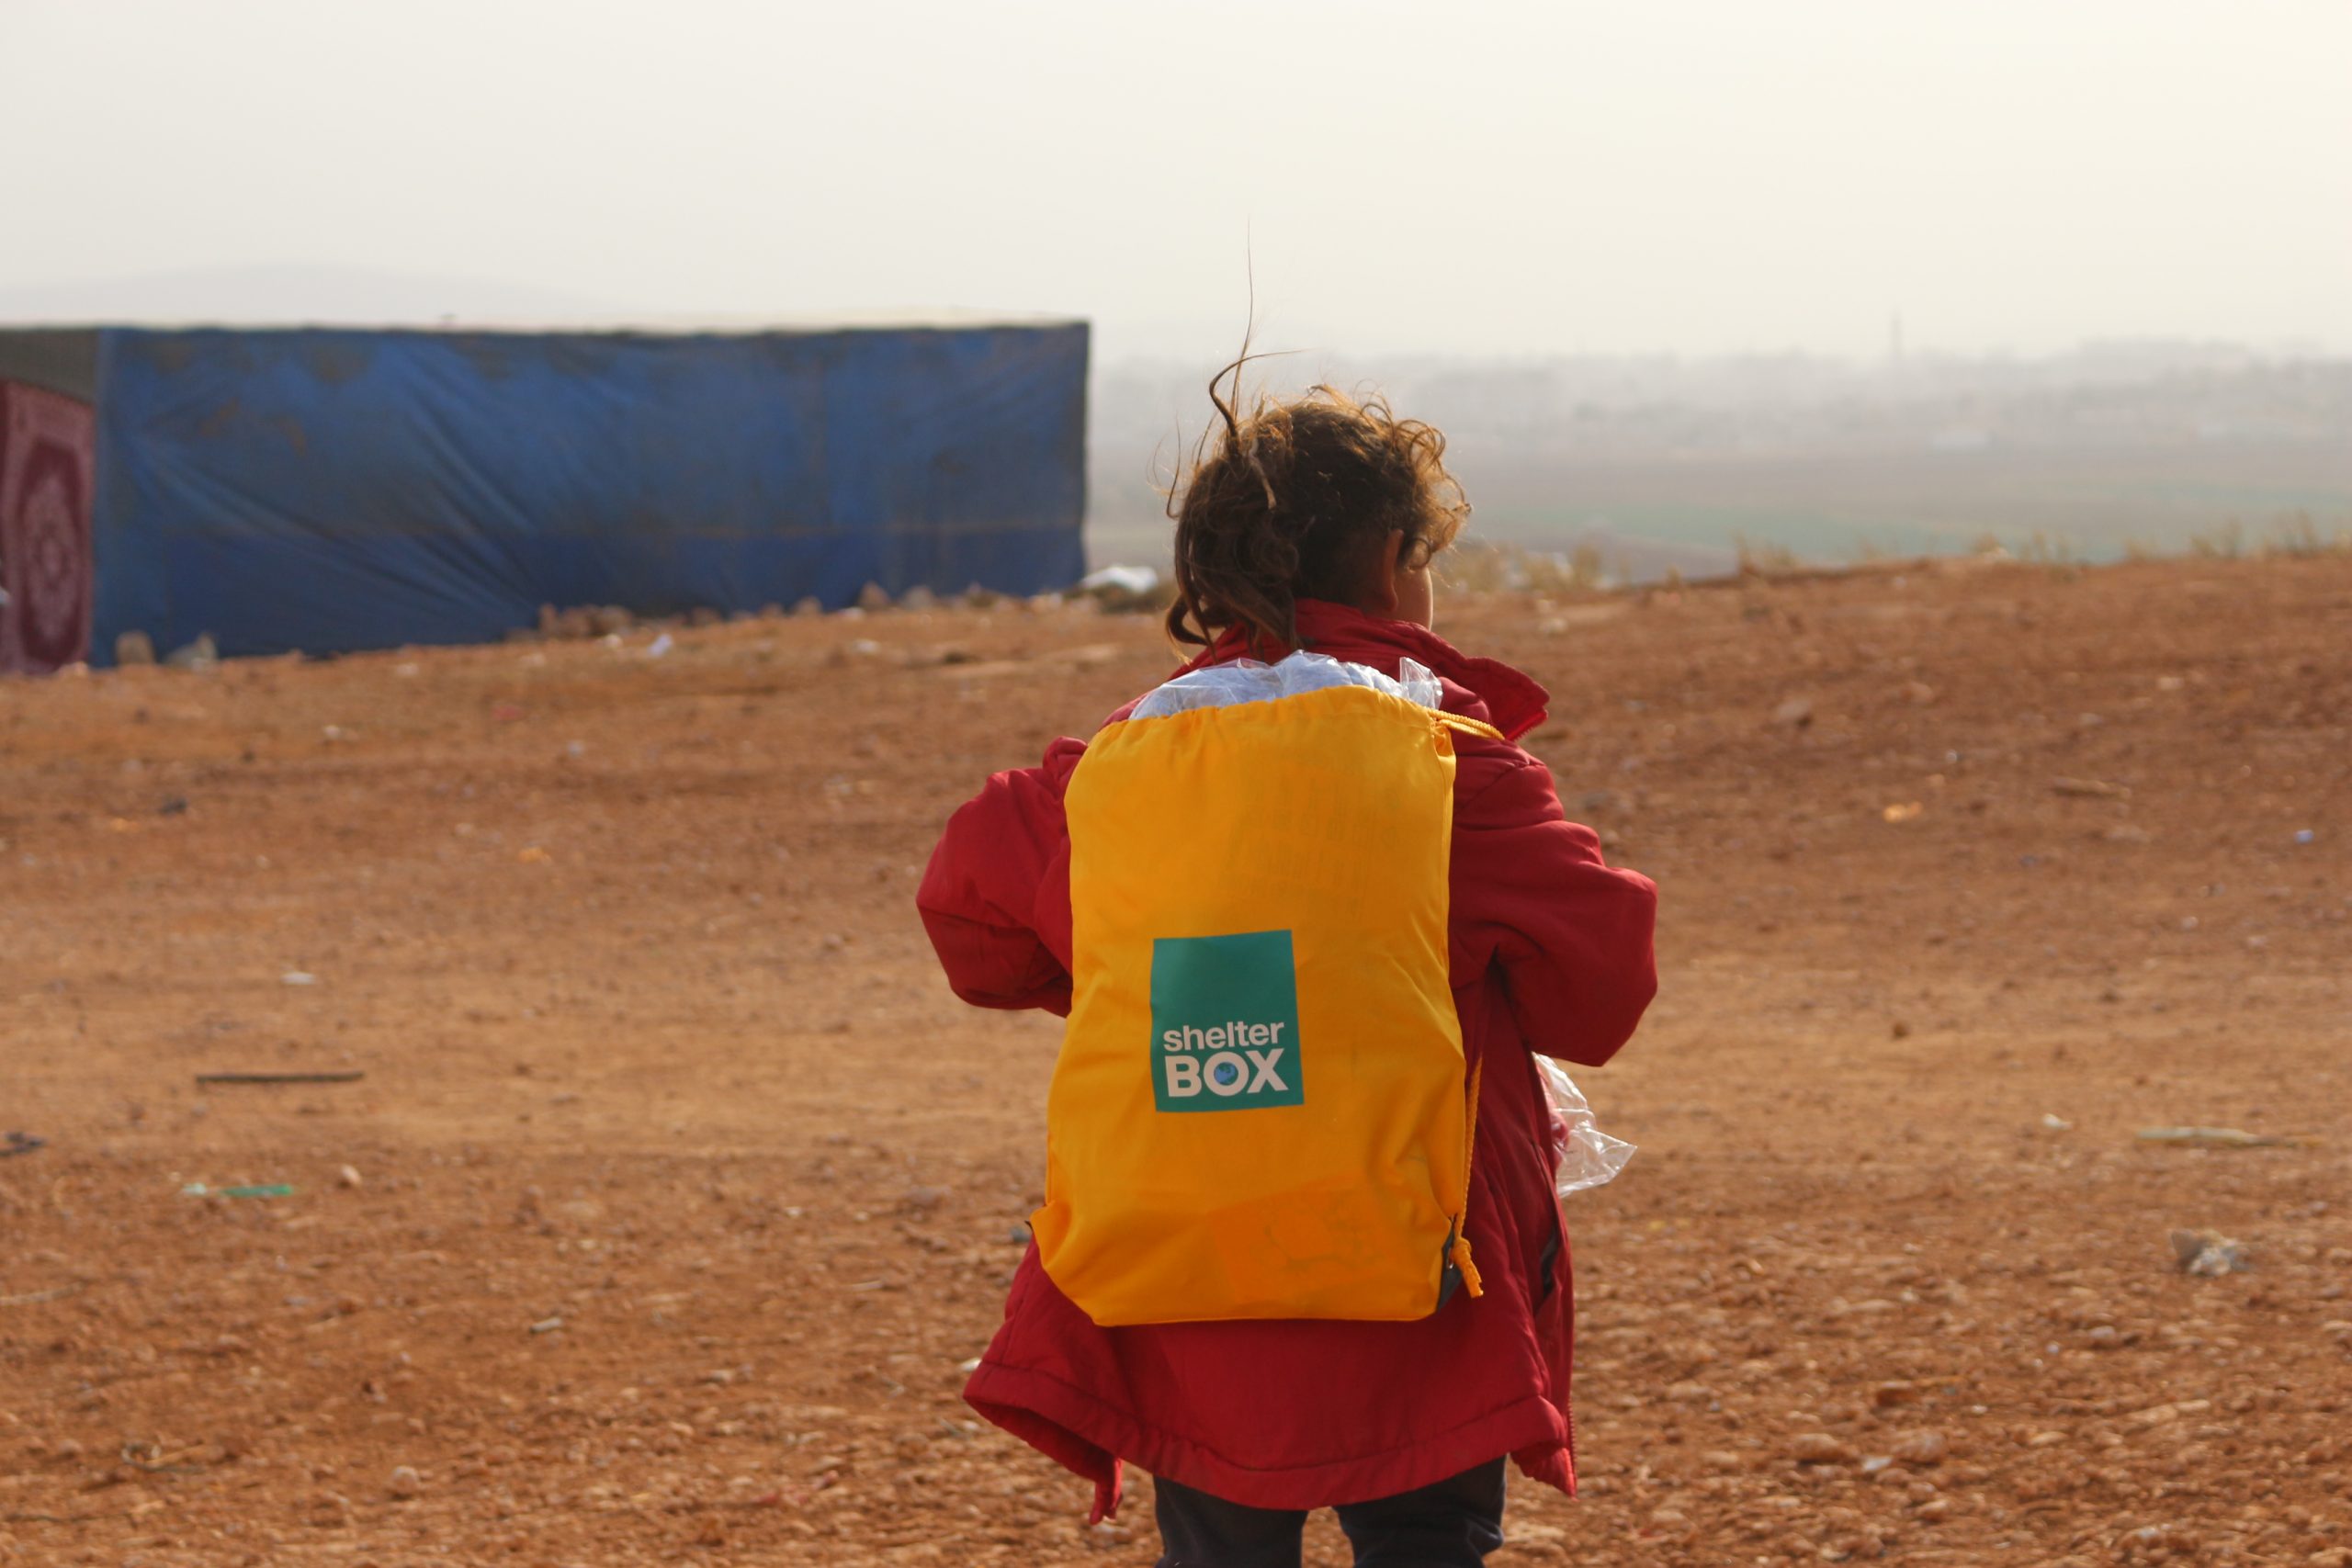 Child with their back to the camera, carrying a yellow backpack with the ShelterBox logo on it in Syria